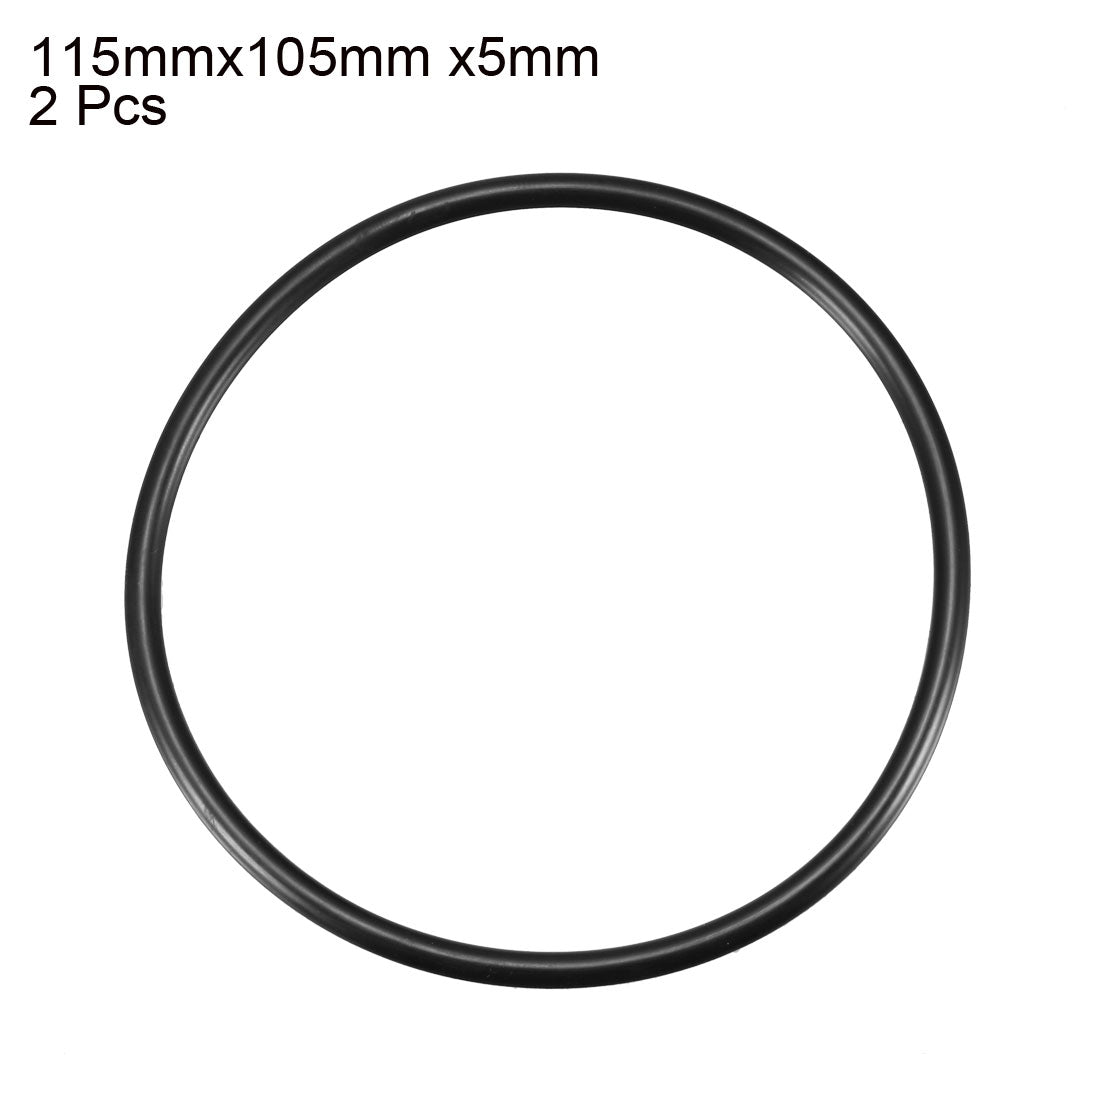 uxcell Uxcell 2pcs Black 22mm Outer Dia 1.9mm Thickness Sealing Ring O-shape Rubber Grommet